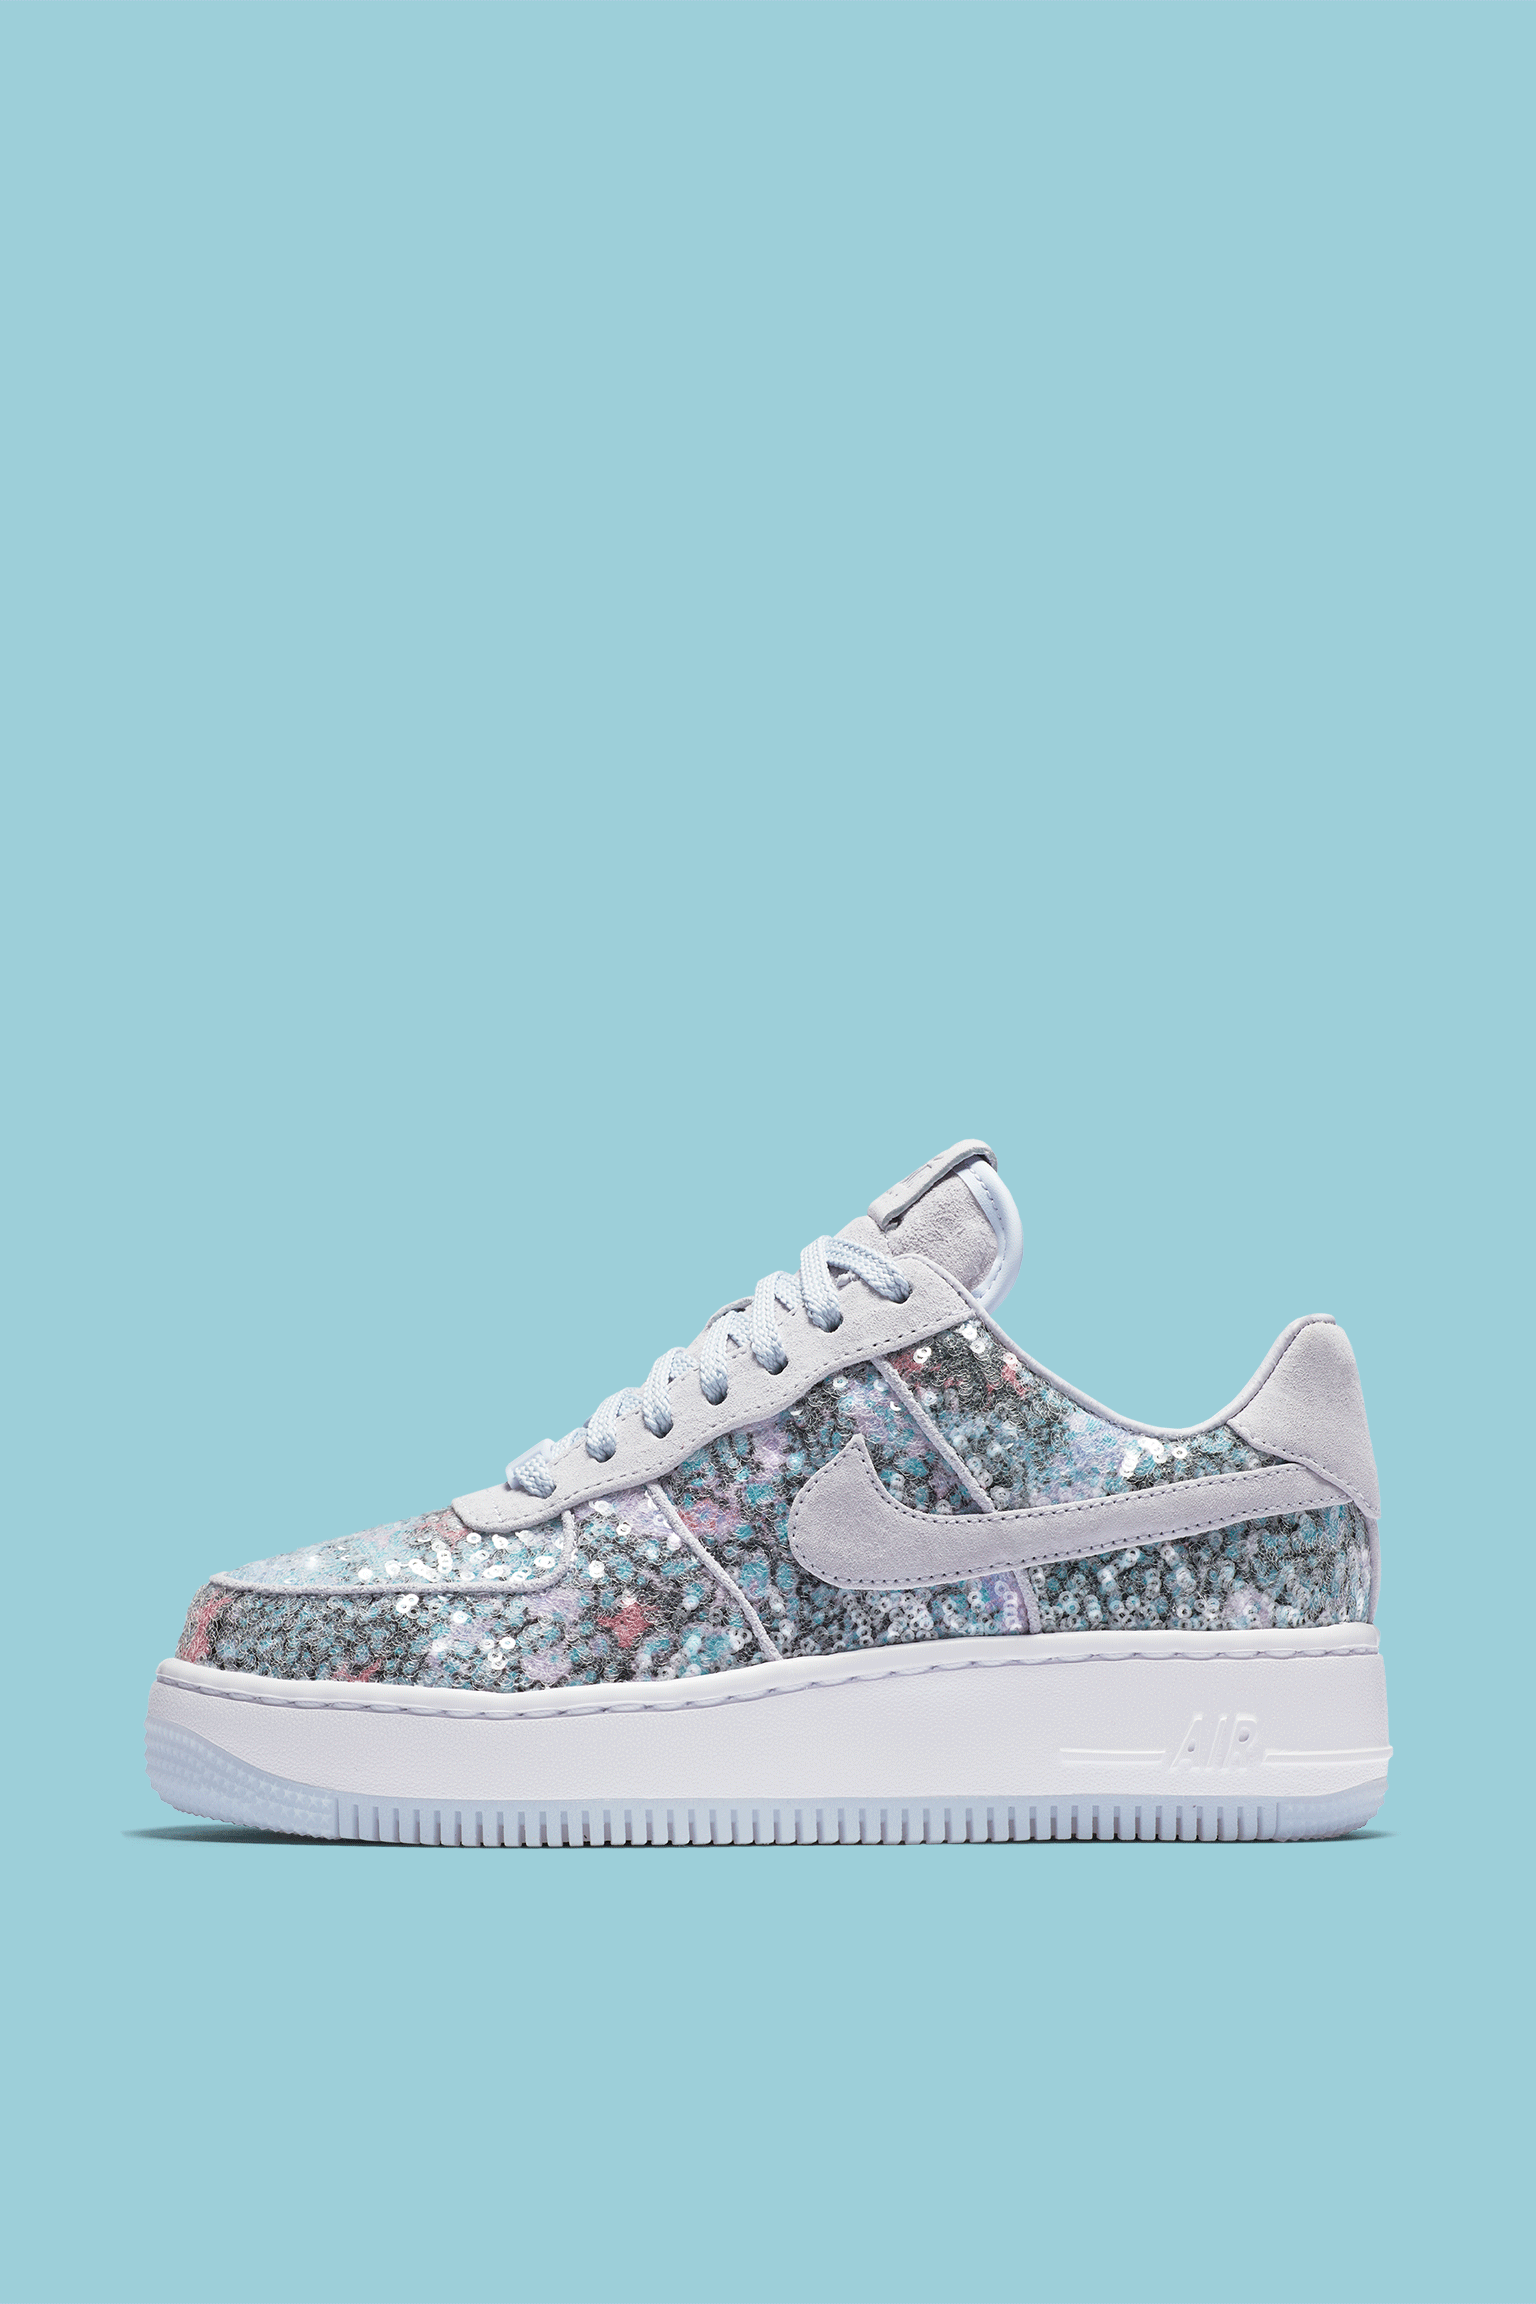 perspectiva Ocupar cascada Women's Nike Air Force 1 Upstep Low 'Palest Purple'. Nike SNKRS